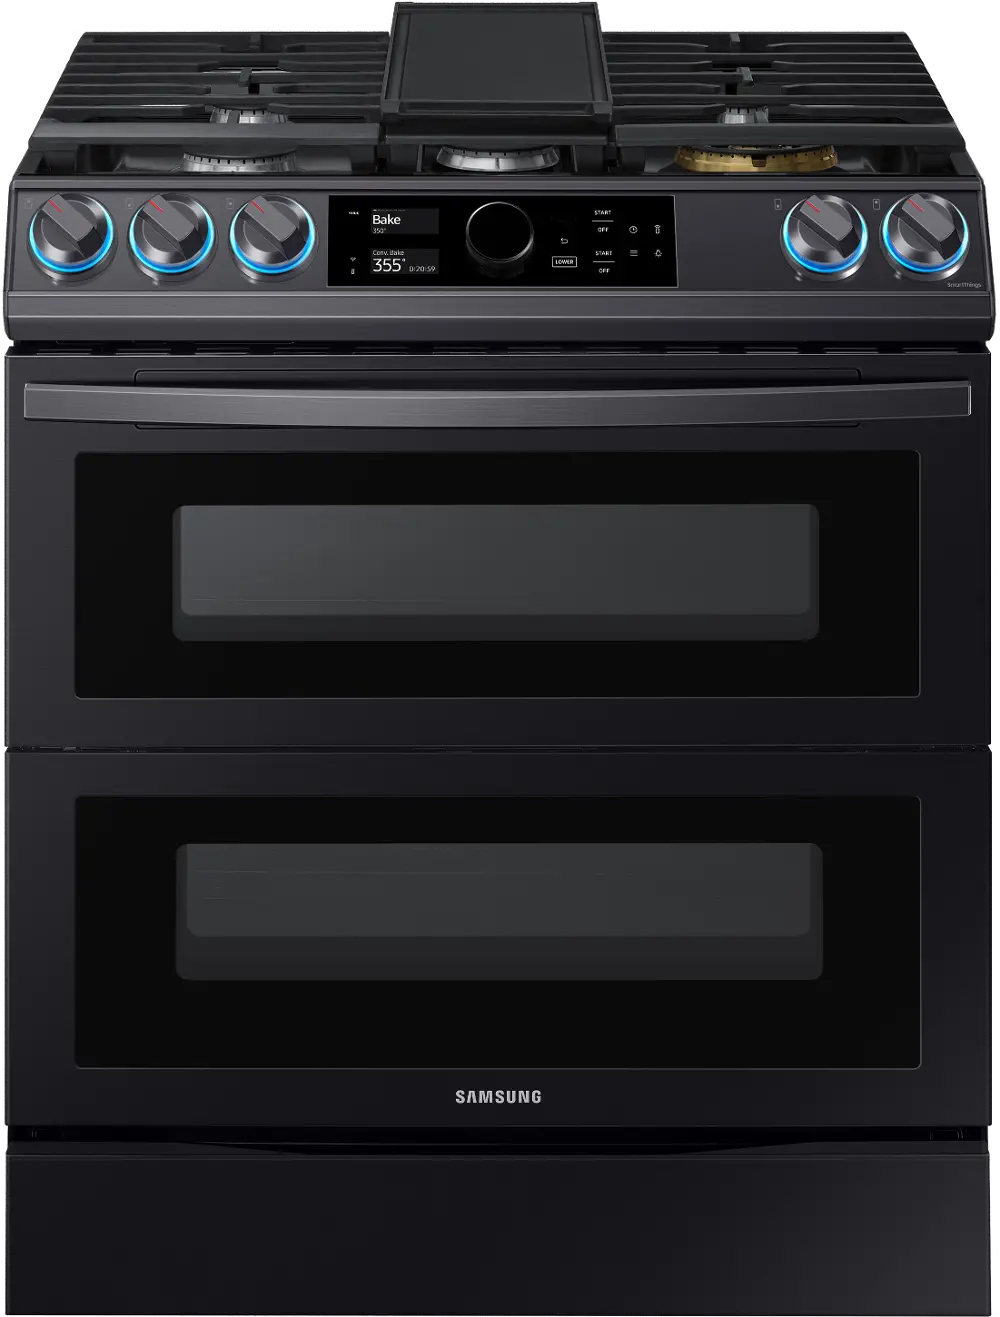 NY63T8751SG Samsung 6.3 cu ft Flex Duo Dual Fuel Range with SmartDial - Black Stainless Steel-1